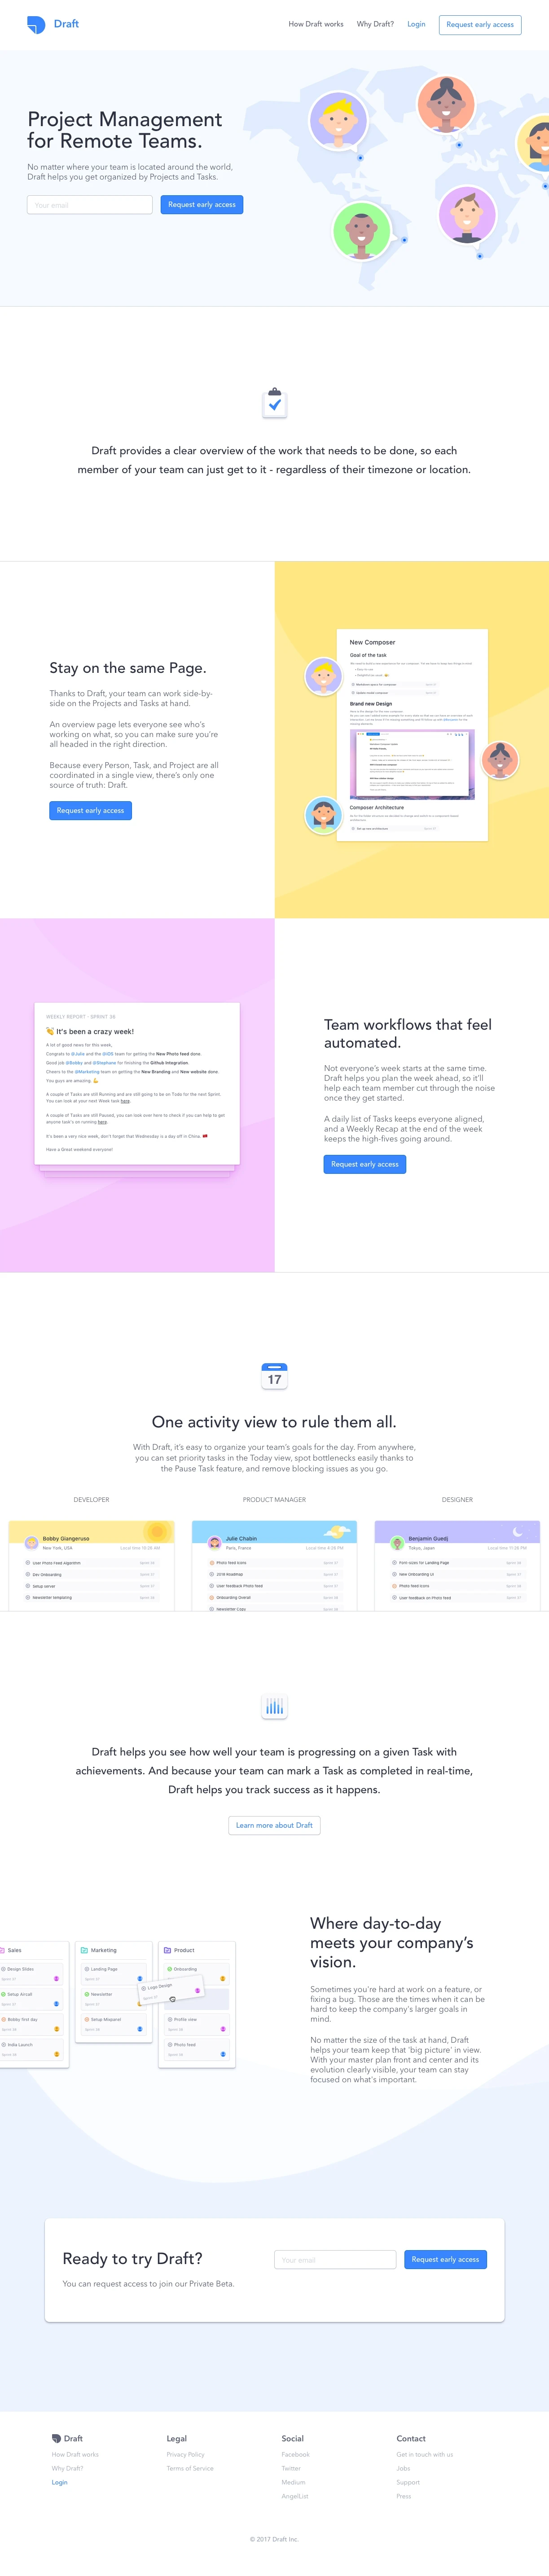 Draft Landing Page Example: Draft is the first Project Management tool built with Remote Teams in mind.